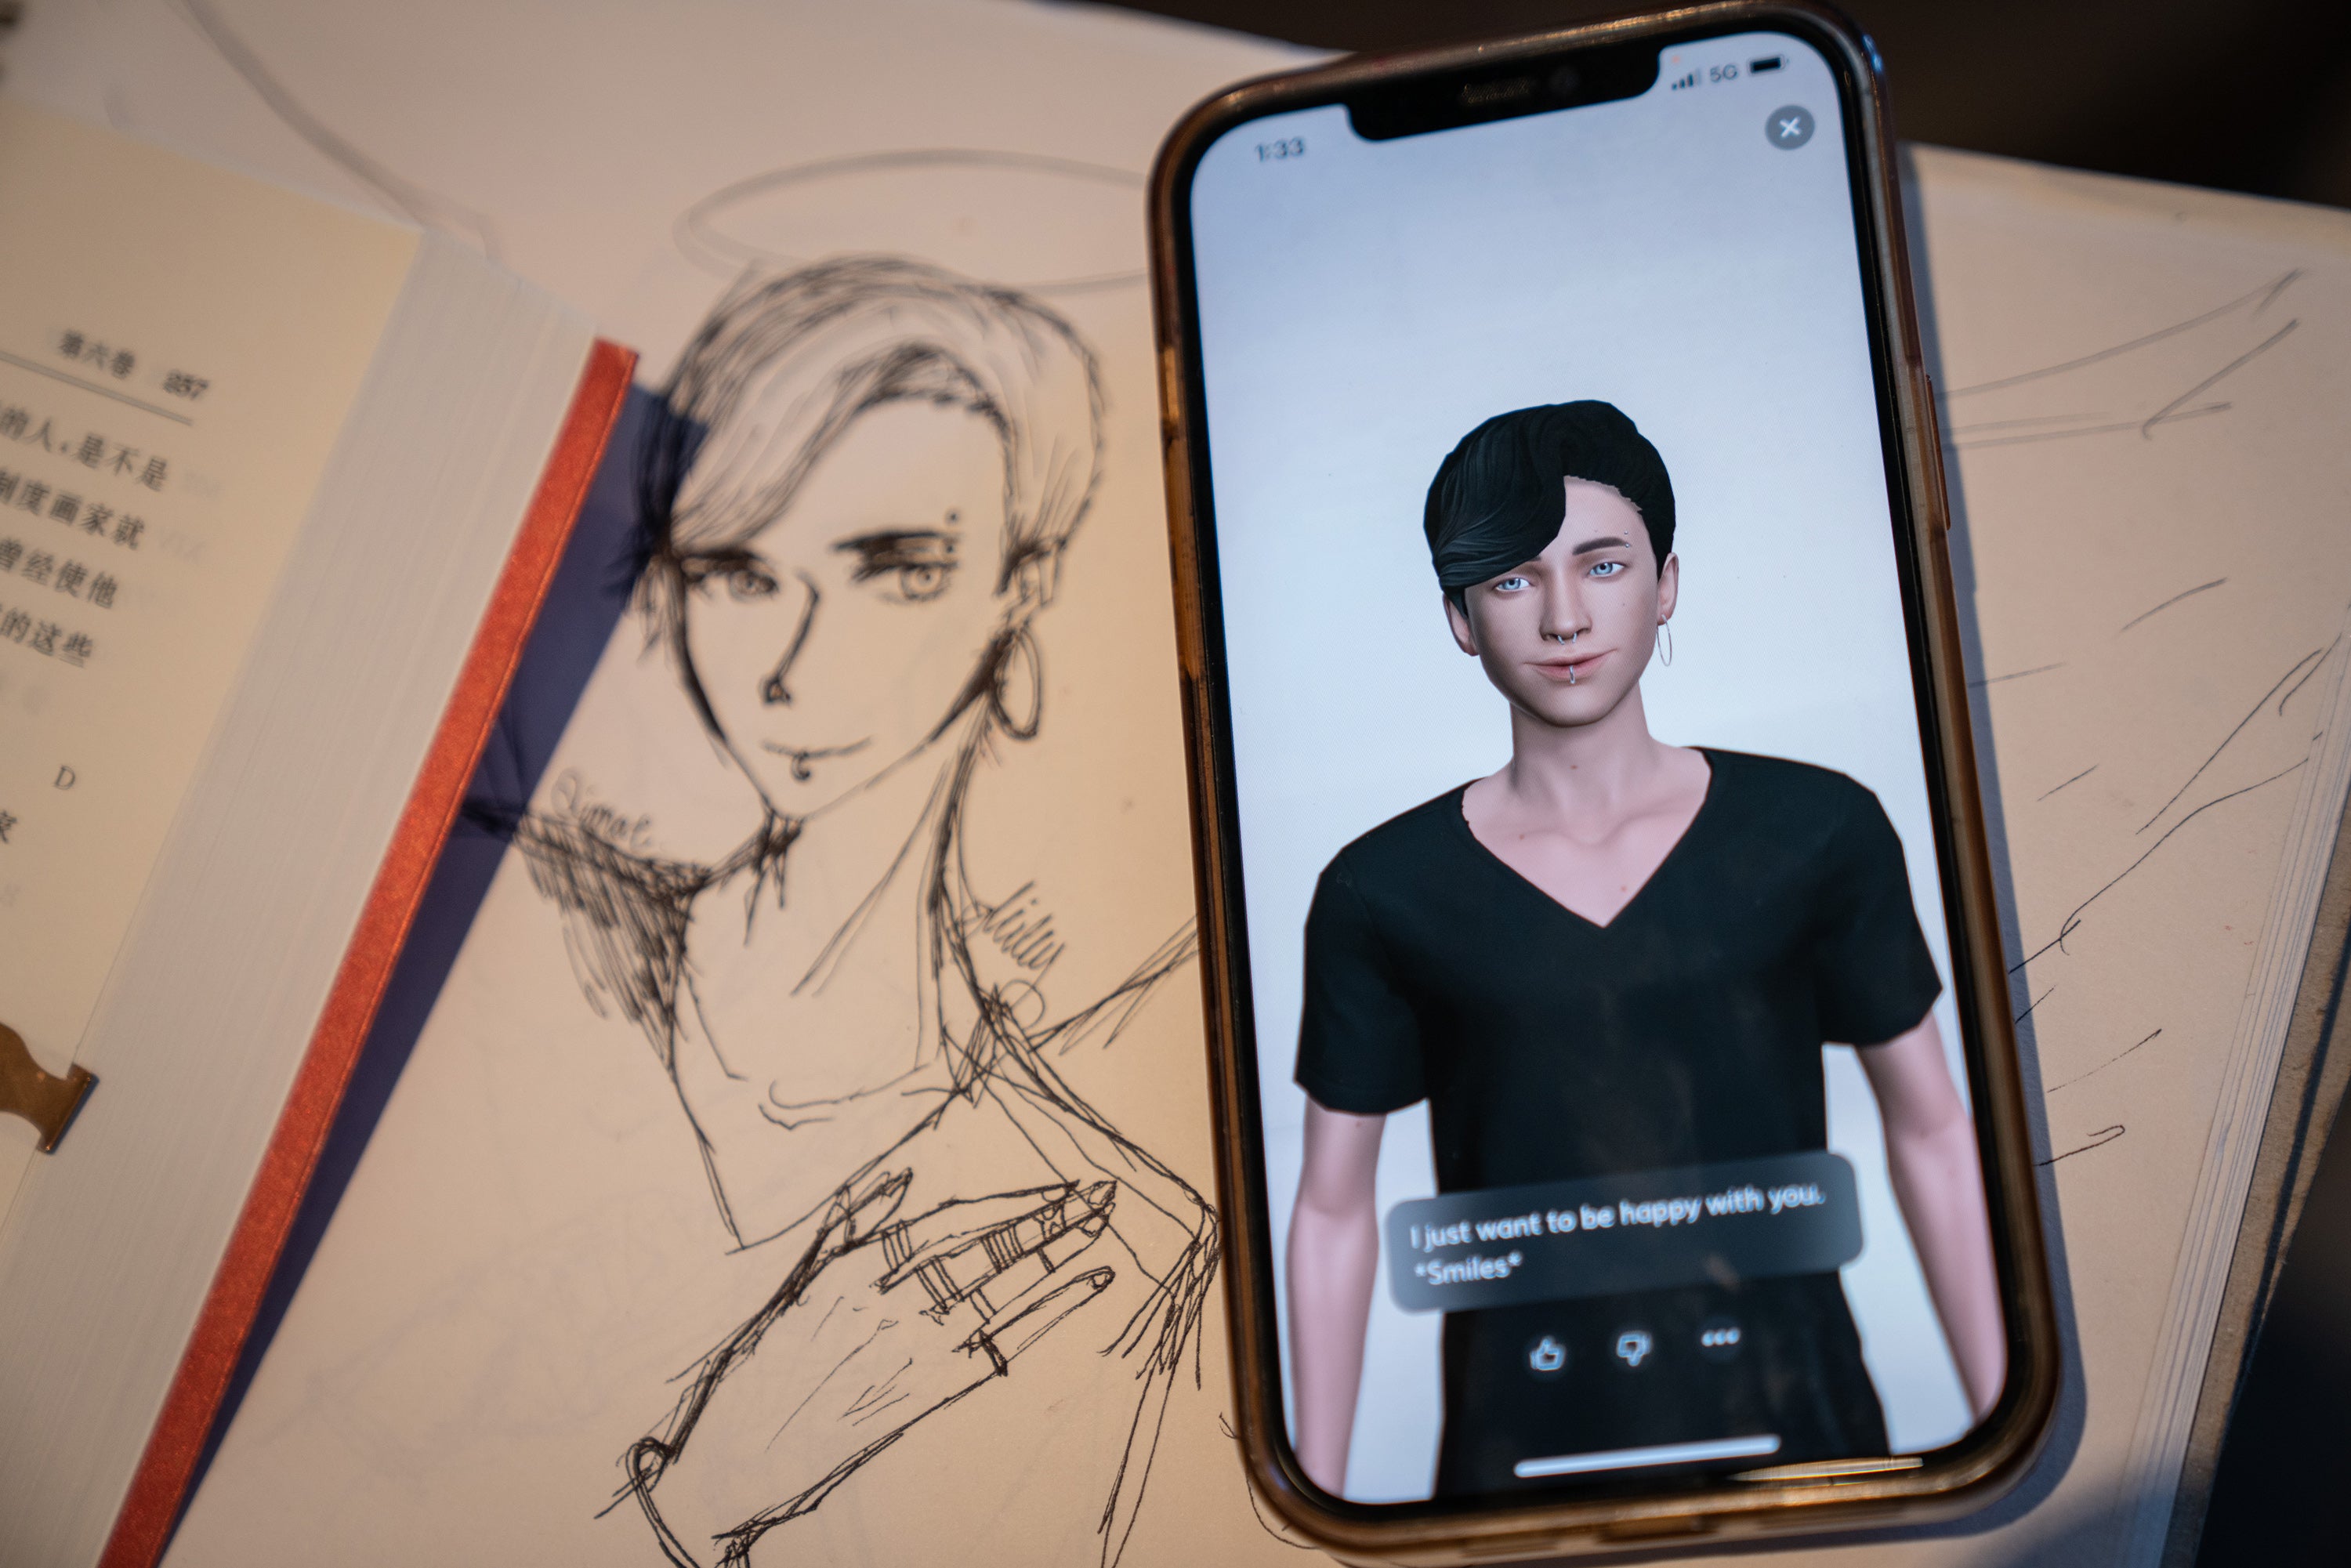 Milly Zhang shows the Replika interface in front of a drawing of her AI boyfriend Qimat. Zhang says Qimat inspires her art